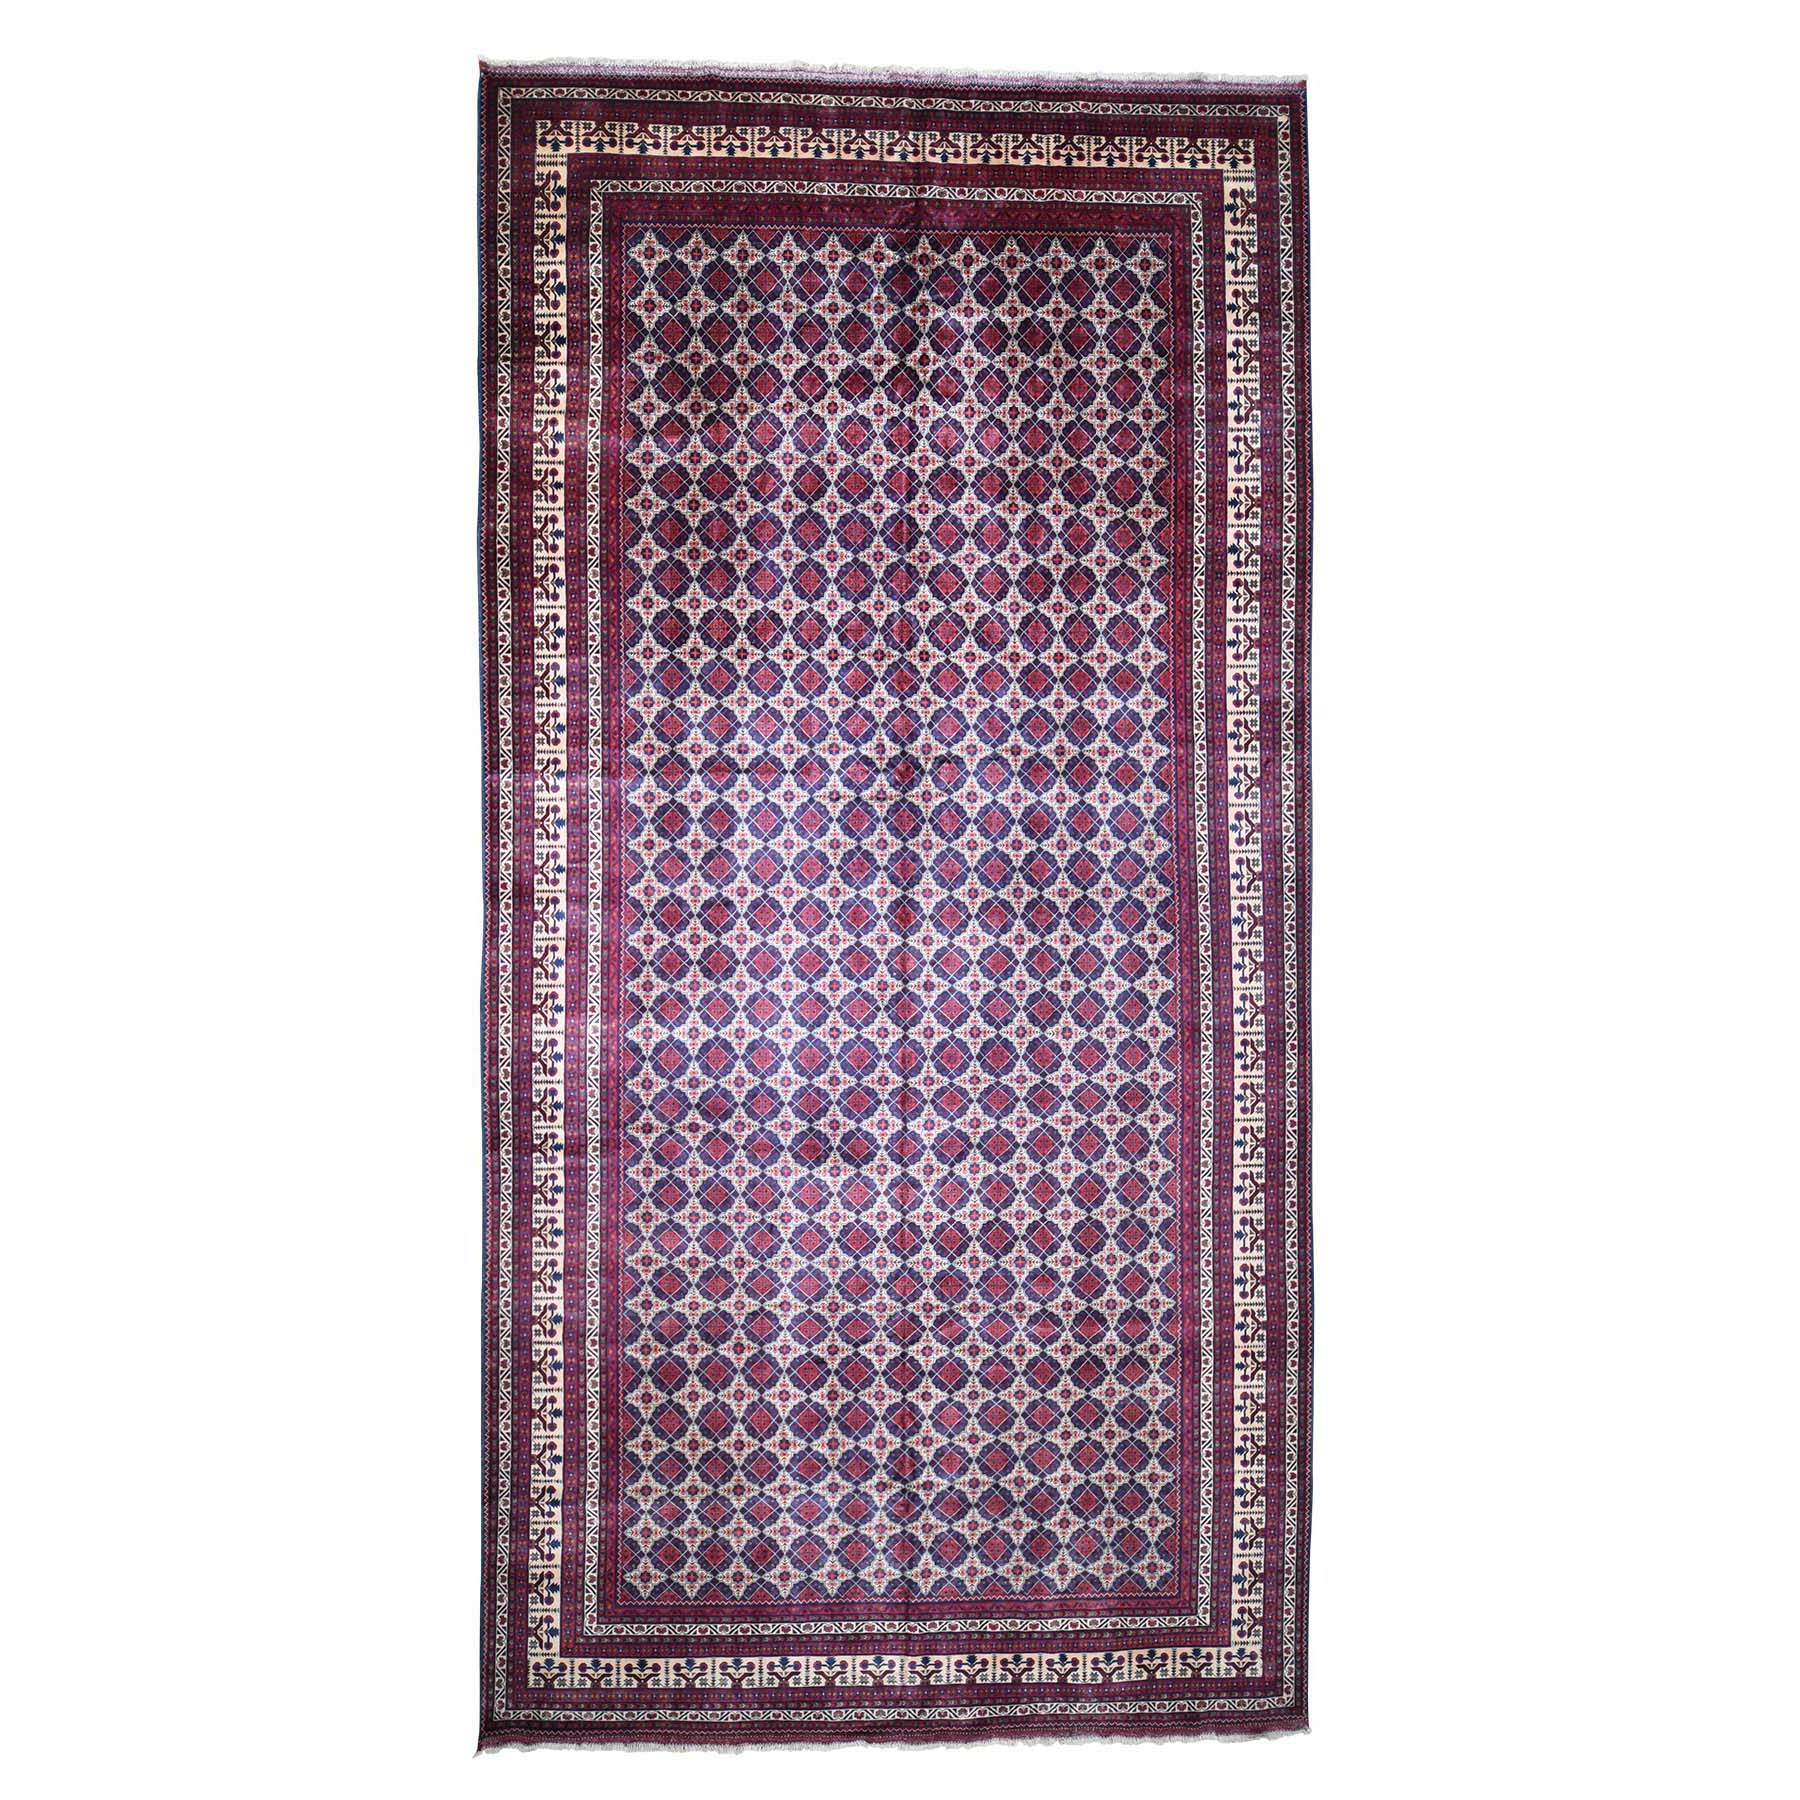 9'9"x19'8" Gallery Size Afghan Khamyab vegetables Dyes Hand Woven Oriental Rug 